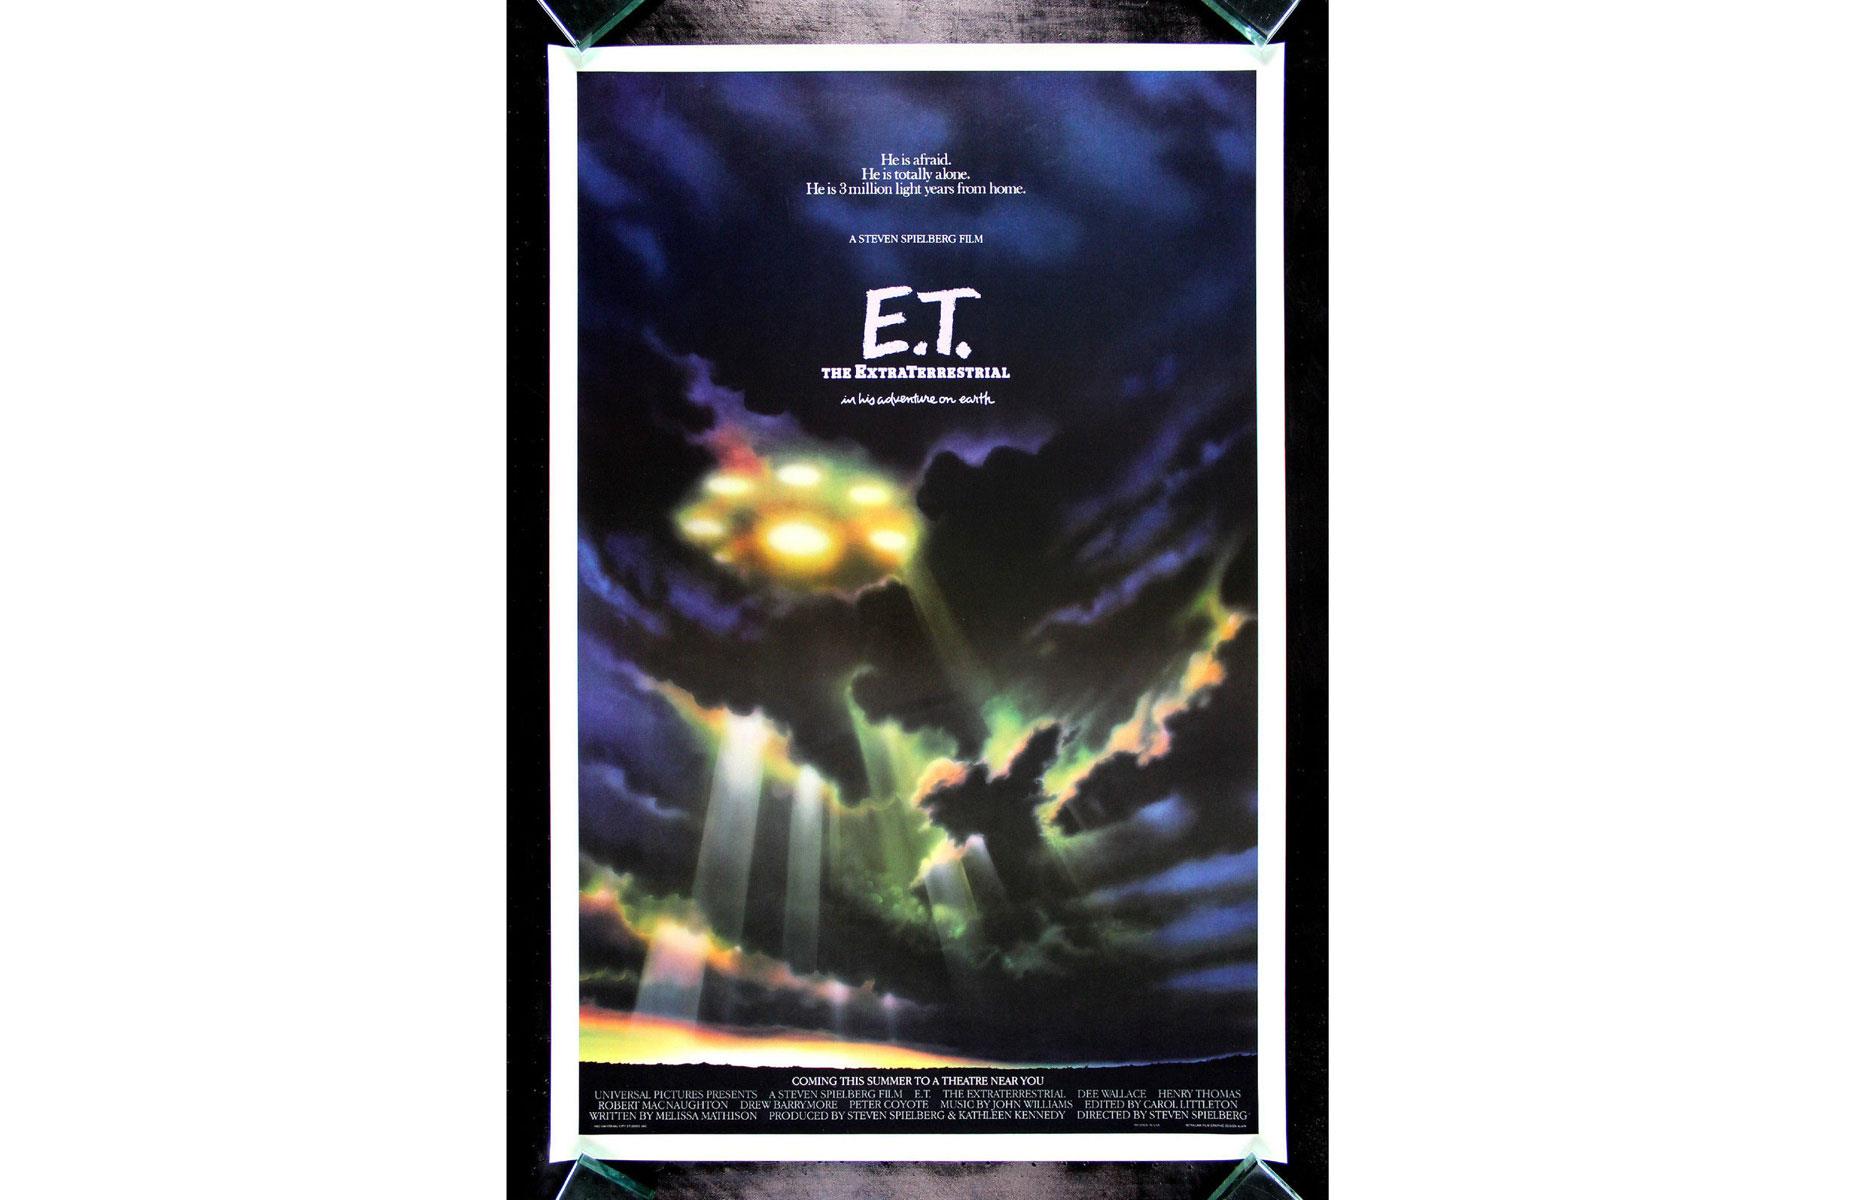 E.T. the Extra-Terrestrial (American poster, 1982): up to $4,000 (£2.9k)